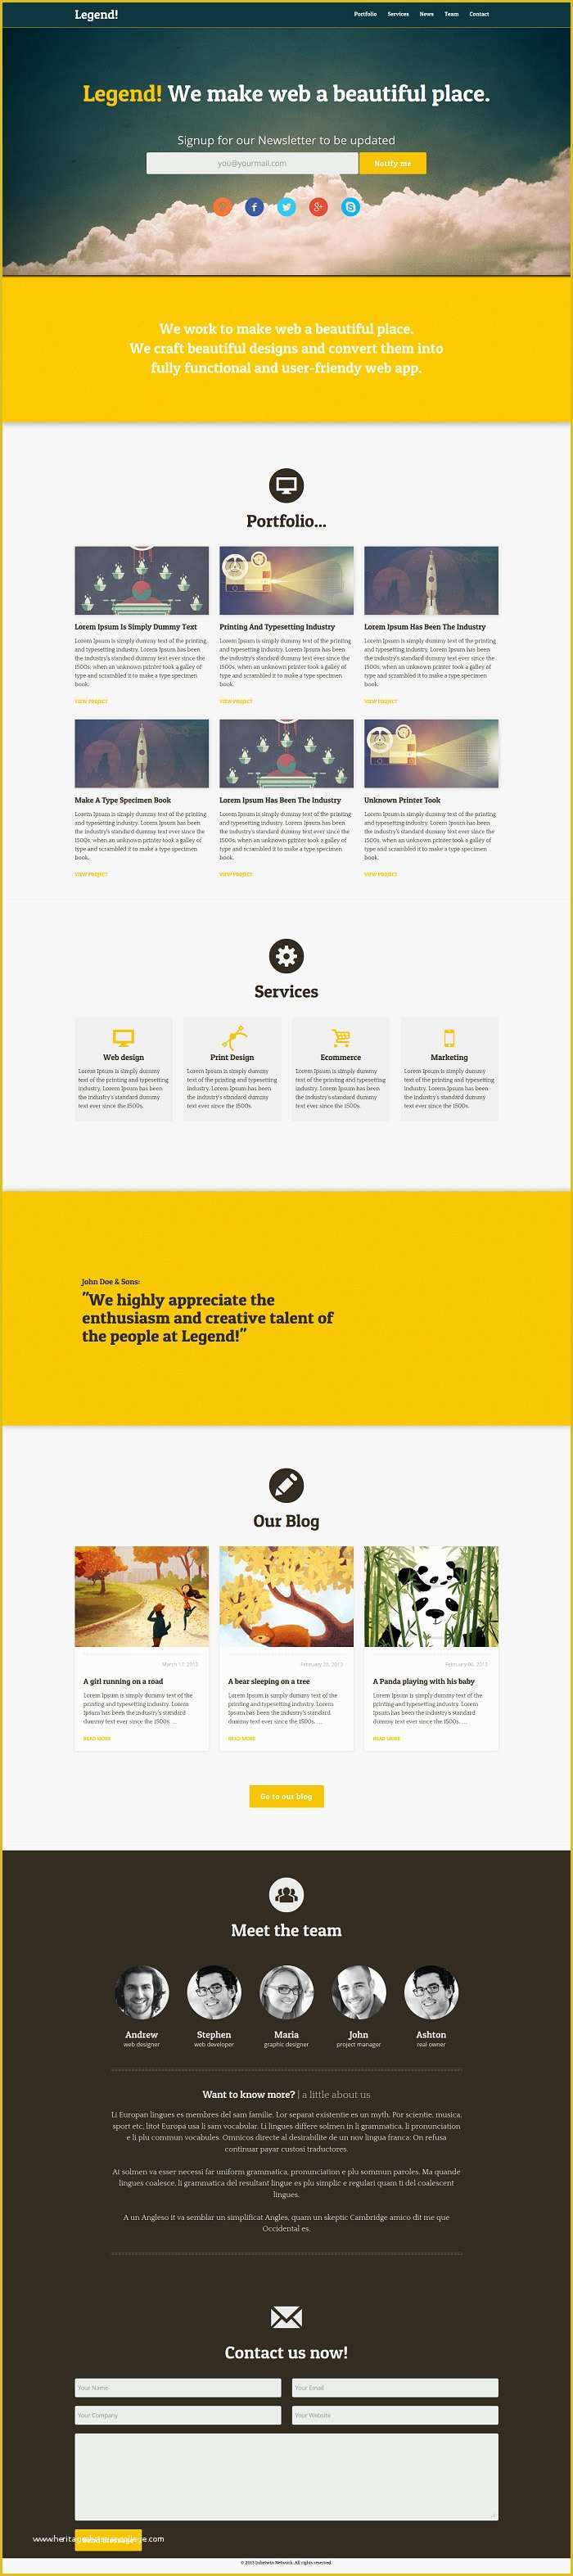 Psd Templates Free Download Of Free Responsive Web Templates with Psd